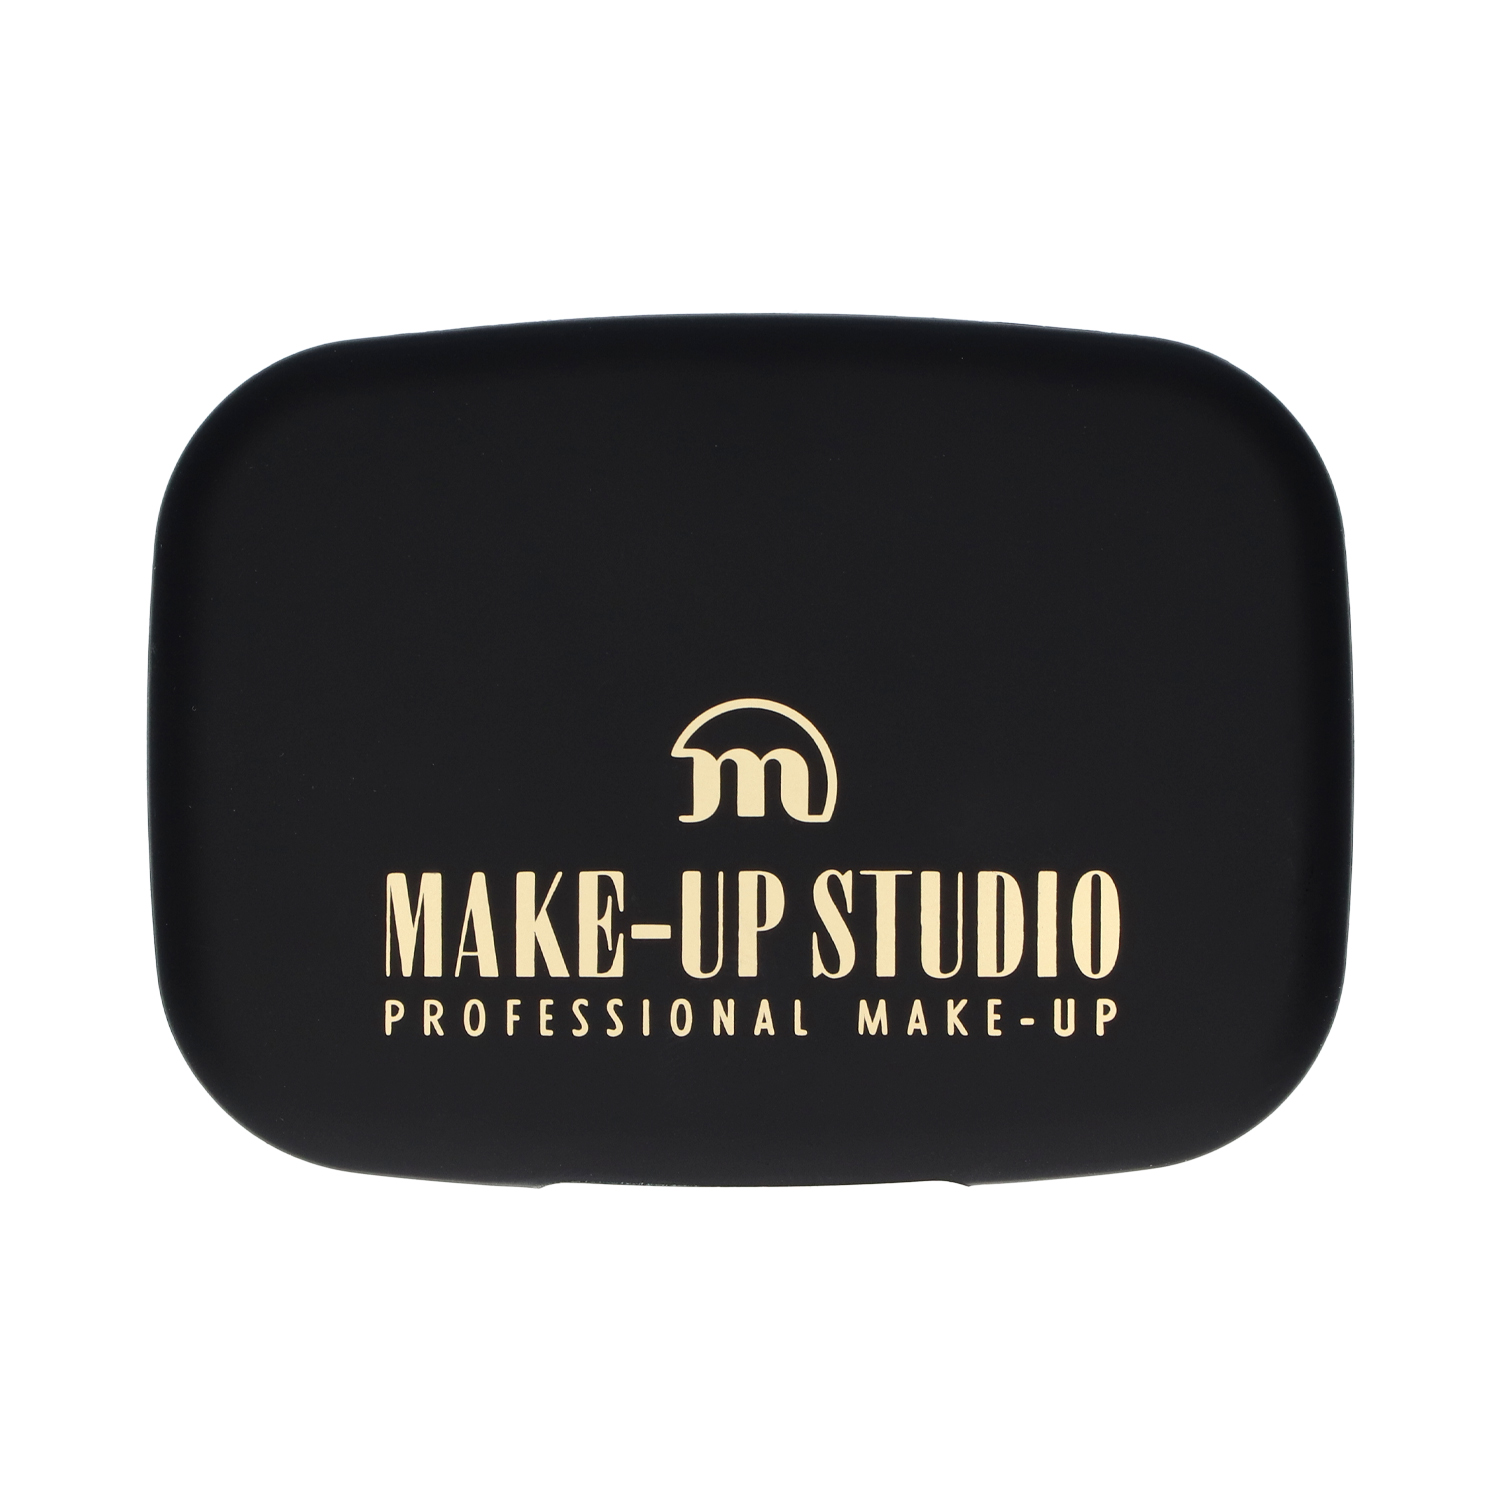 Compact Powder Puder Make-up 3-in-1 - Fair